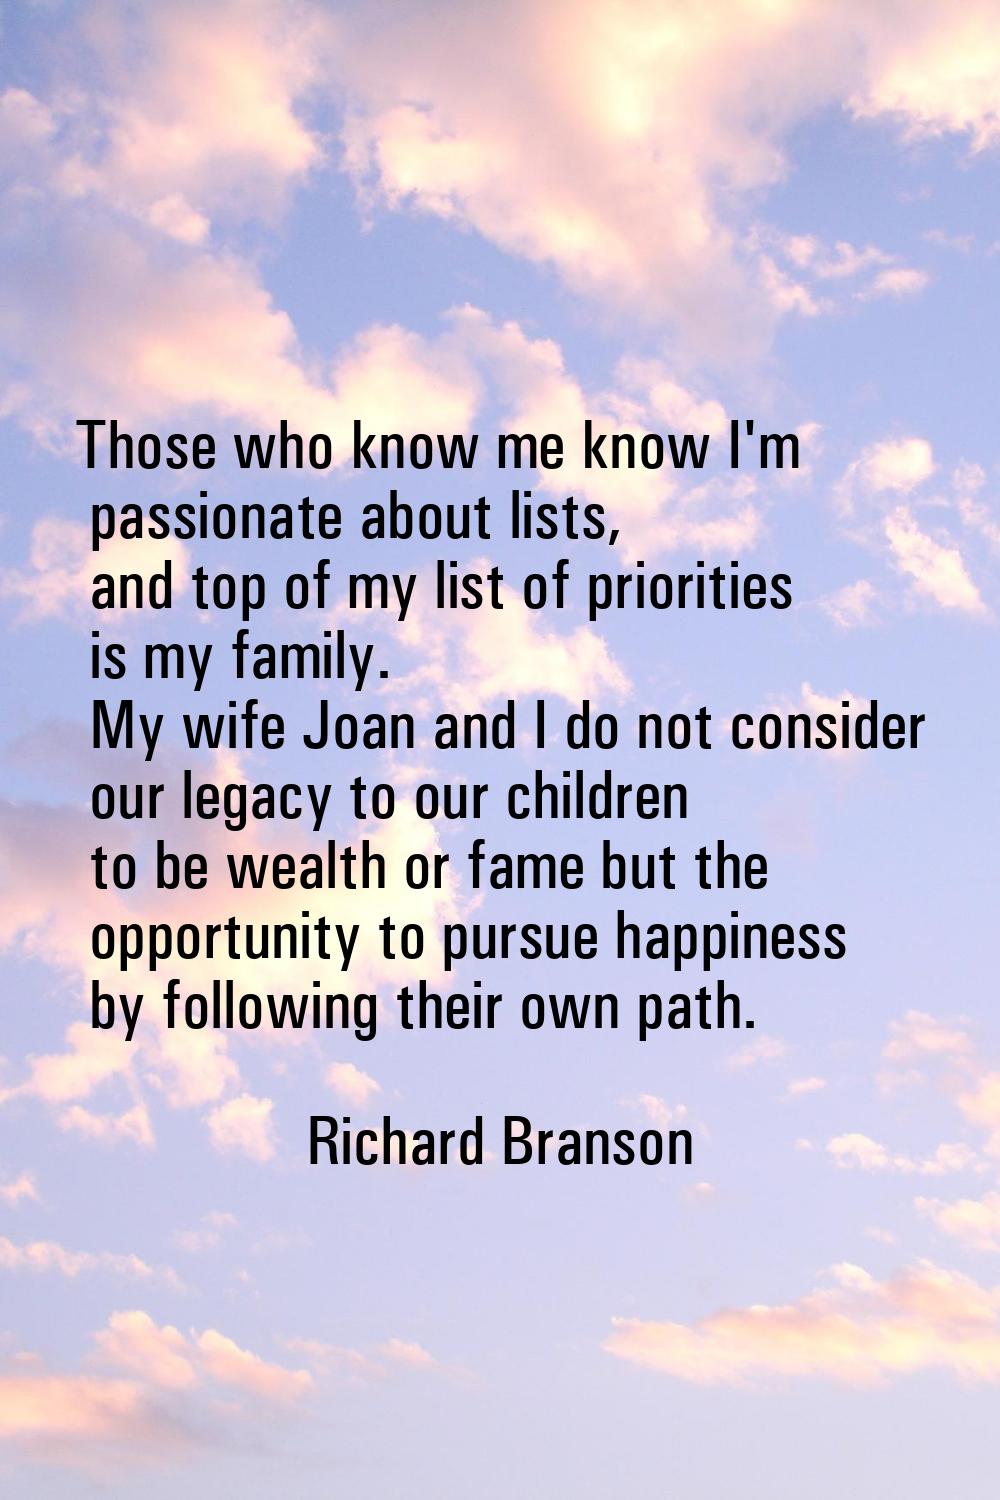 Those who know me know I'm passionate about lists, and top of my list of priorities is my family. M